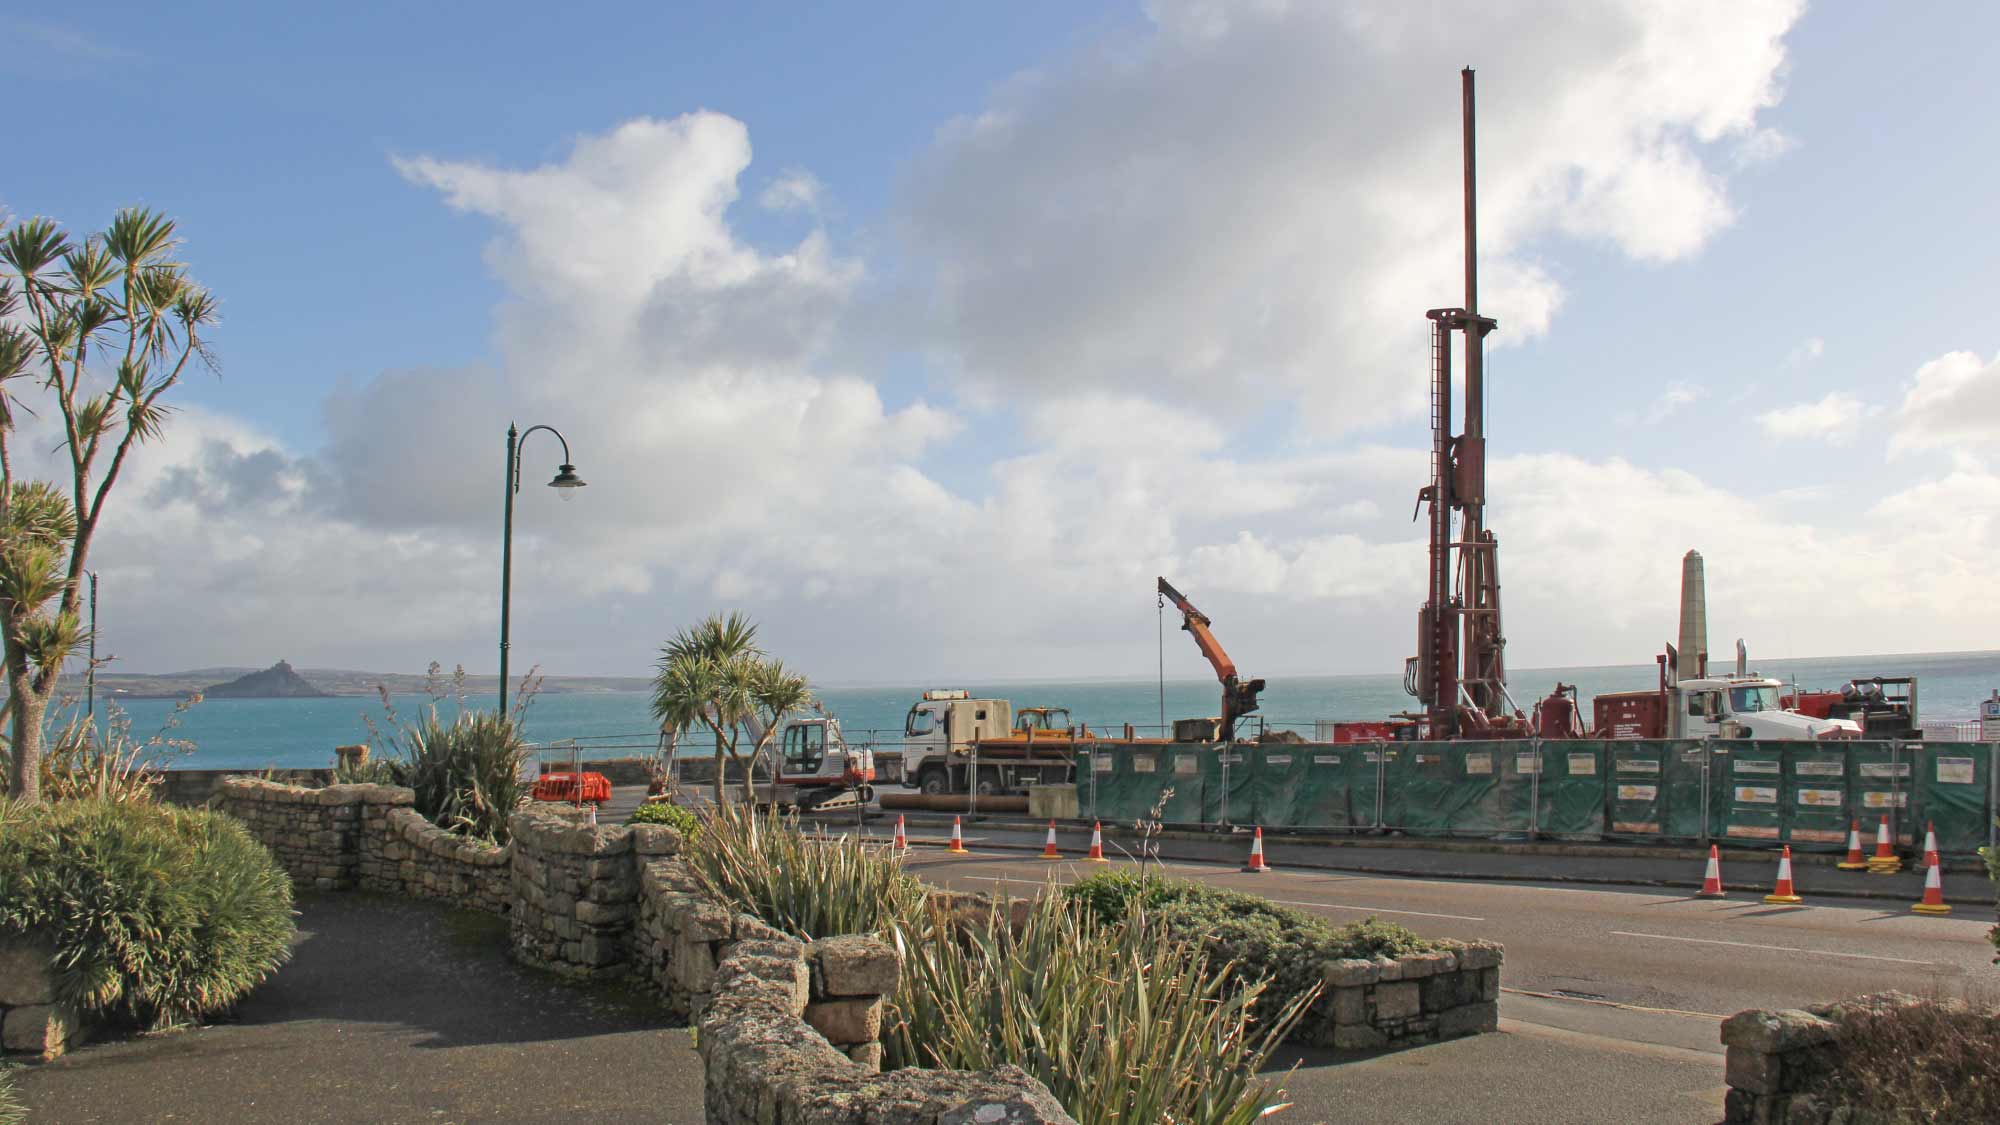 Image of drilling rig on site at jubilee pool